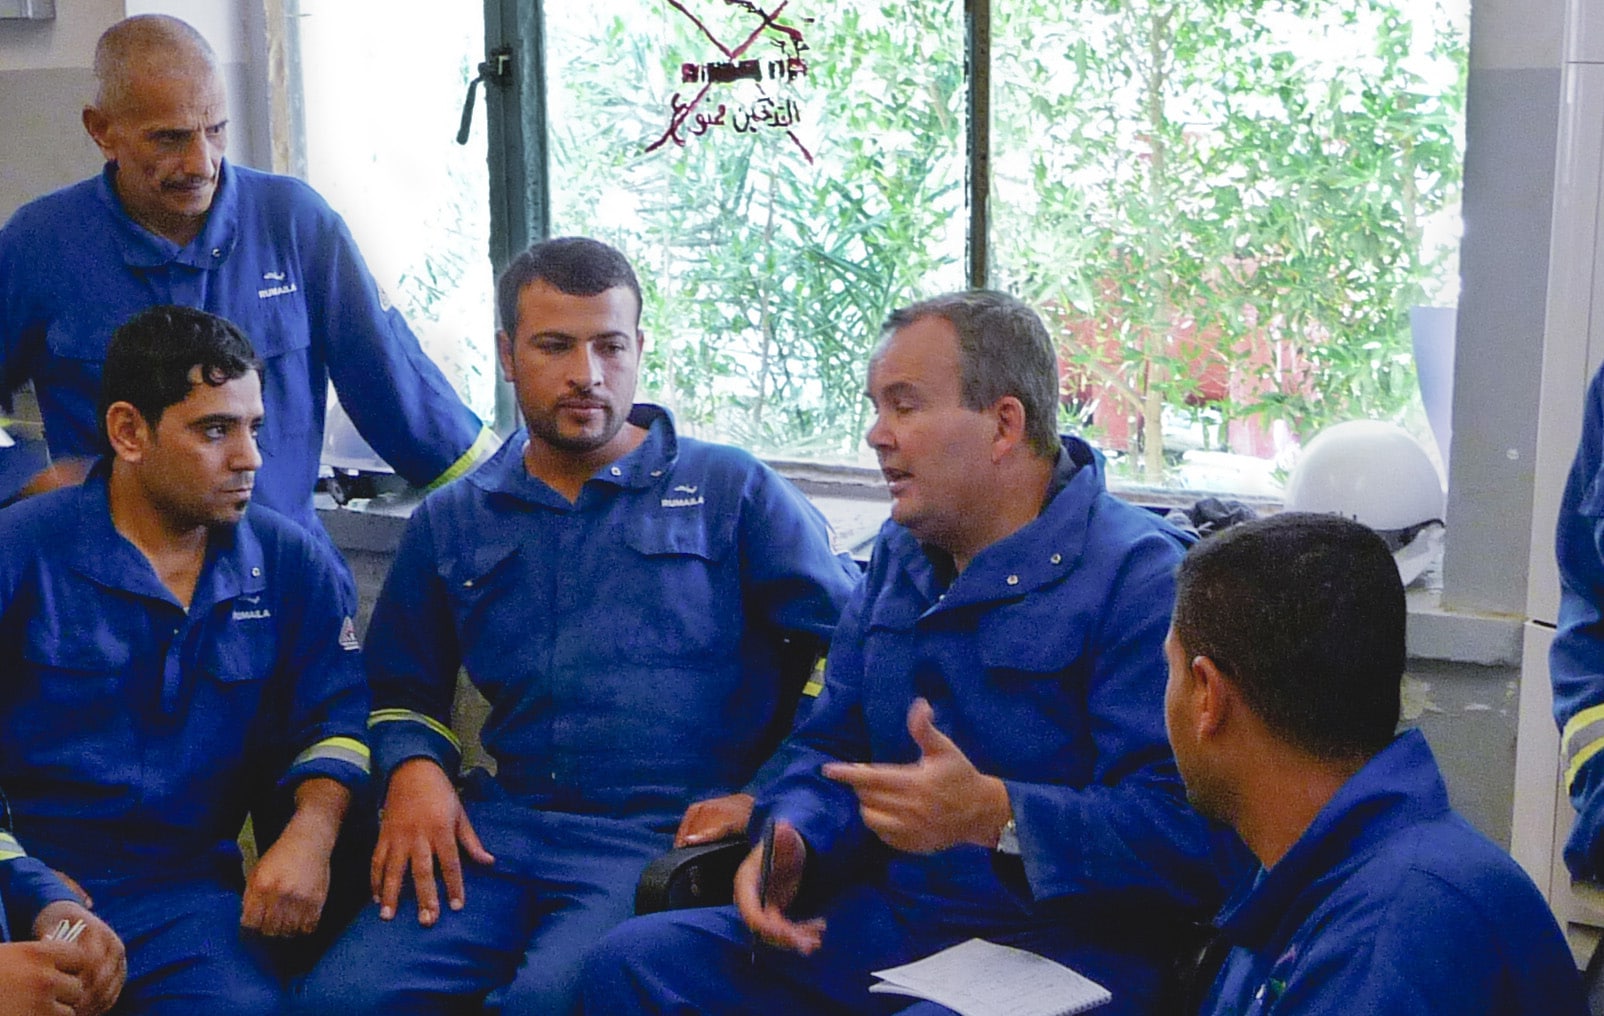 Group of men talking in blue jumpsuits